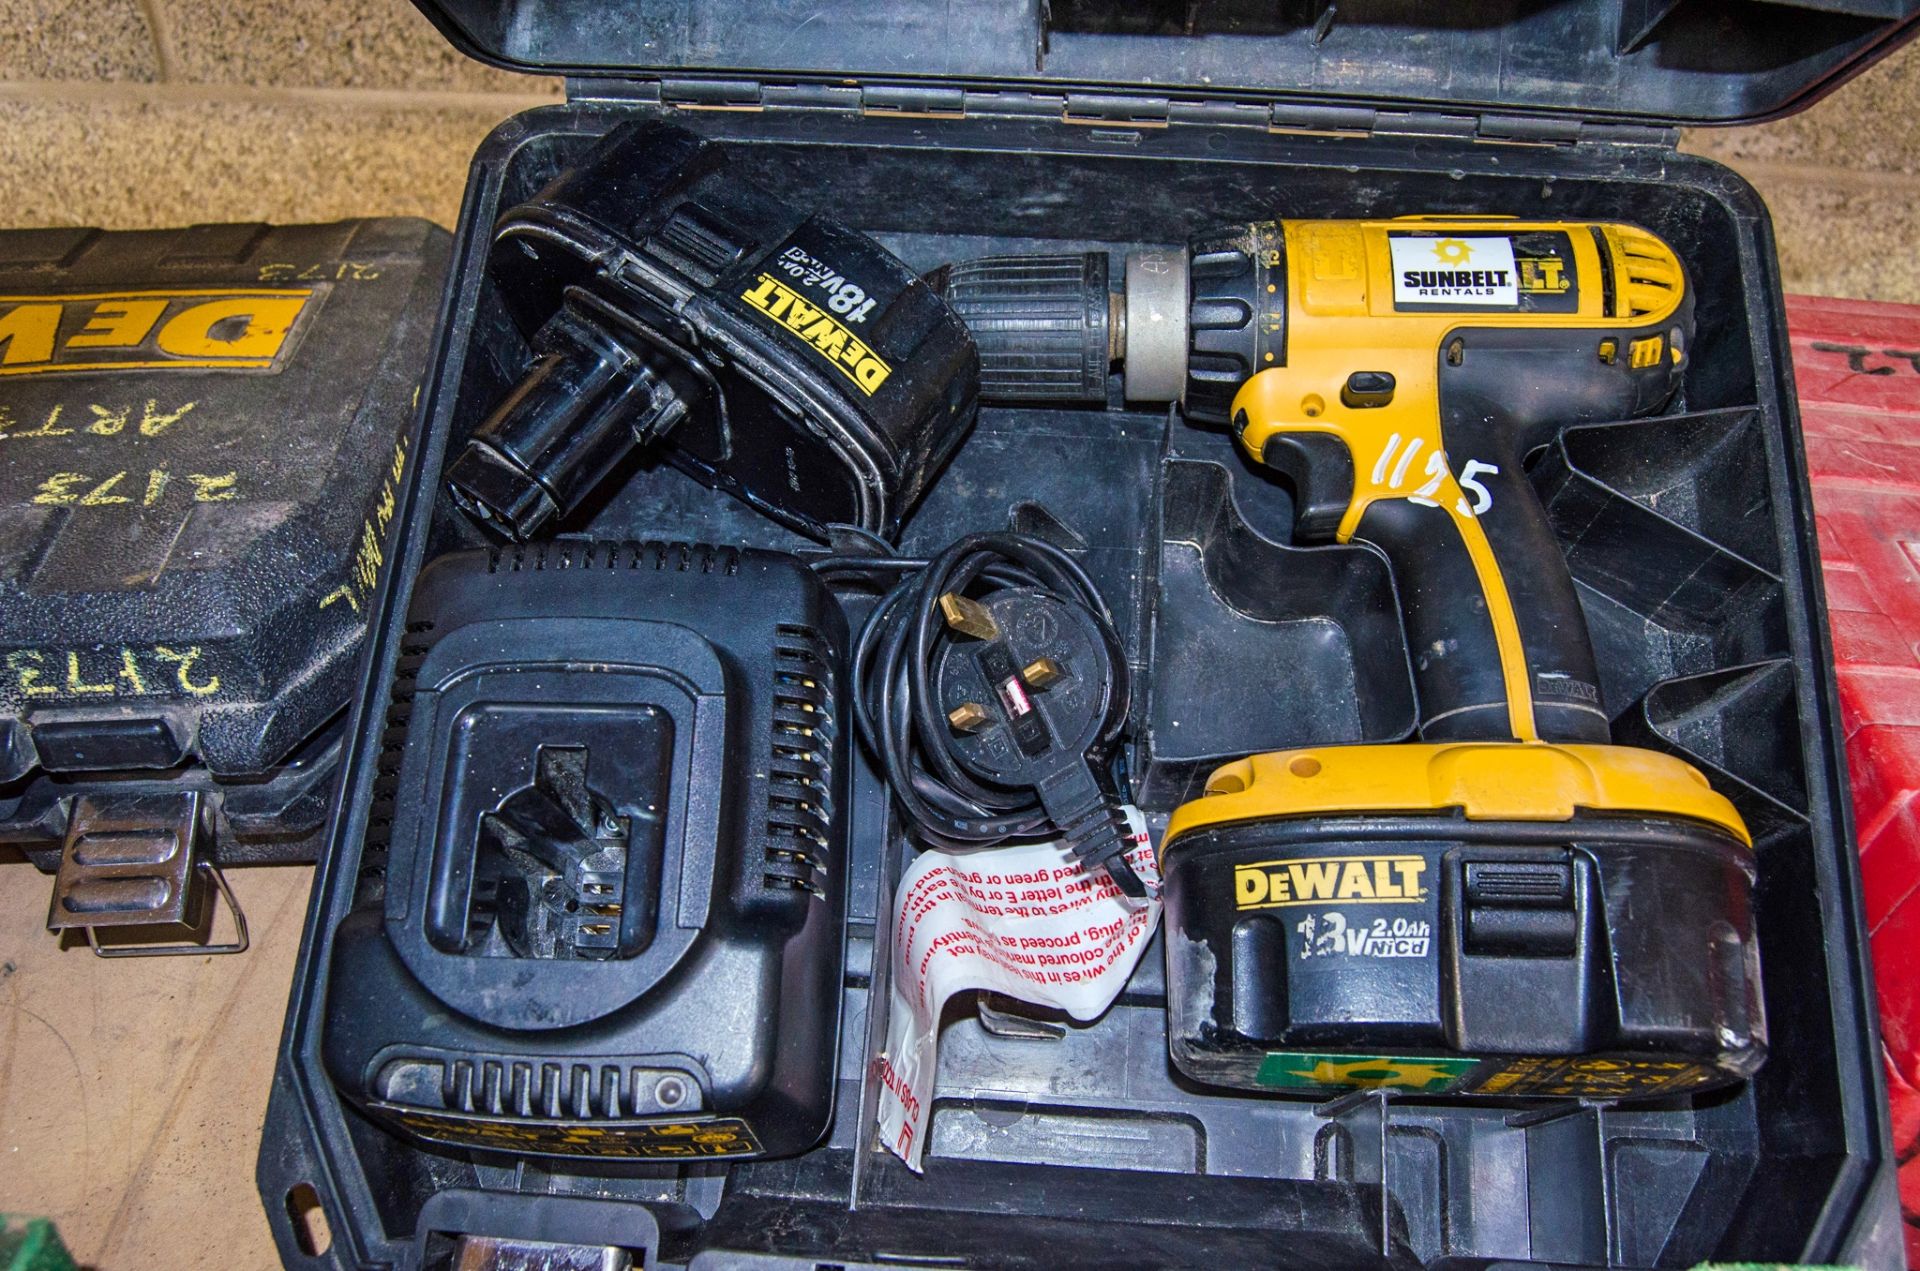 Dewalt DC725 18v cordless power drill c/w 2 batteries, charger and carry case AS3401